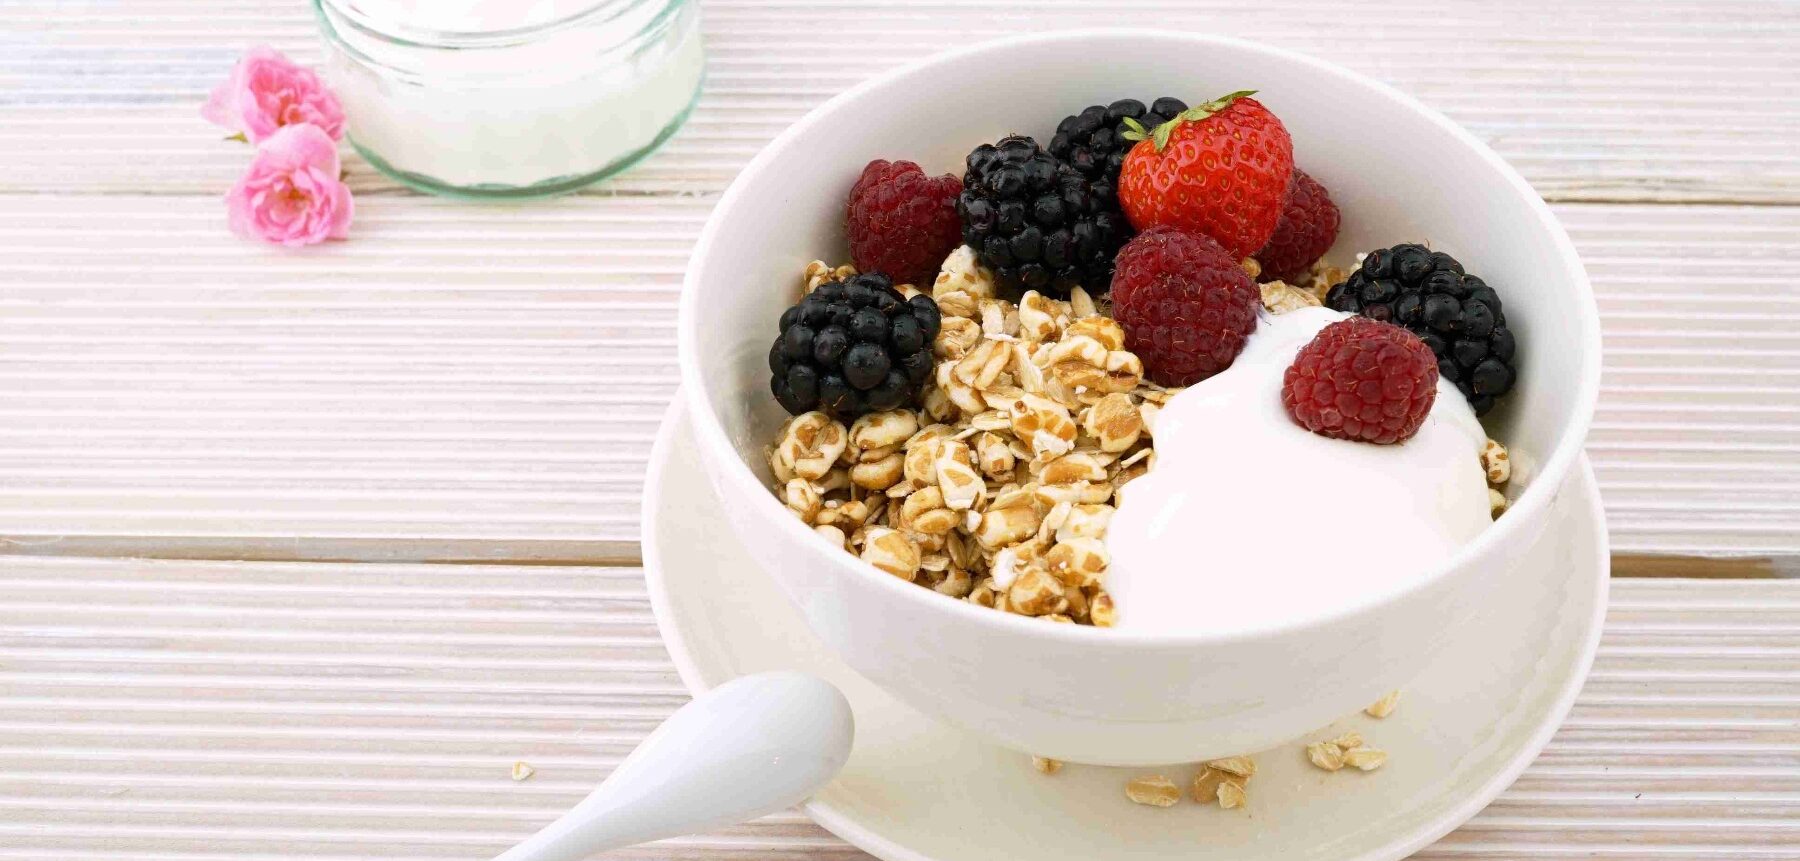 What to eat before a workout Oatmeal with berries and nuts